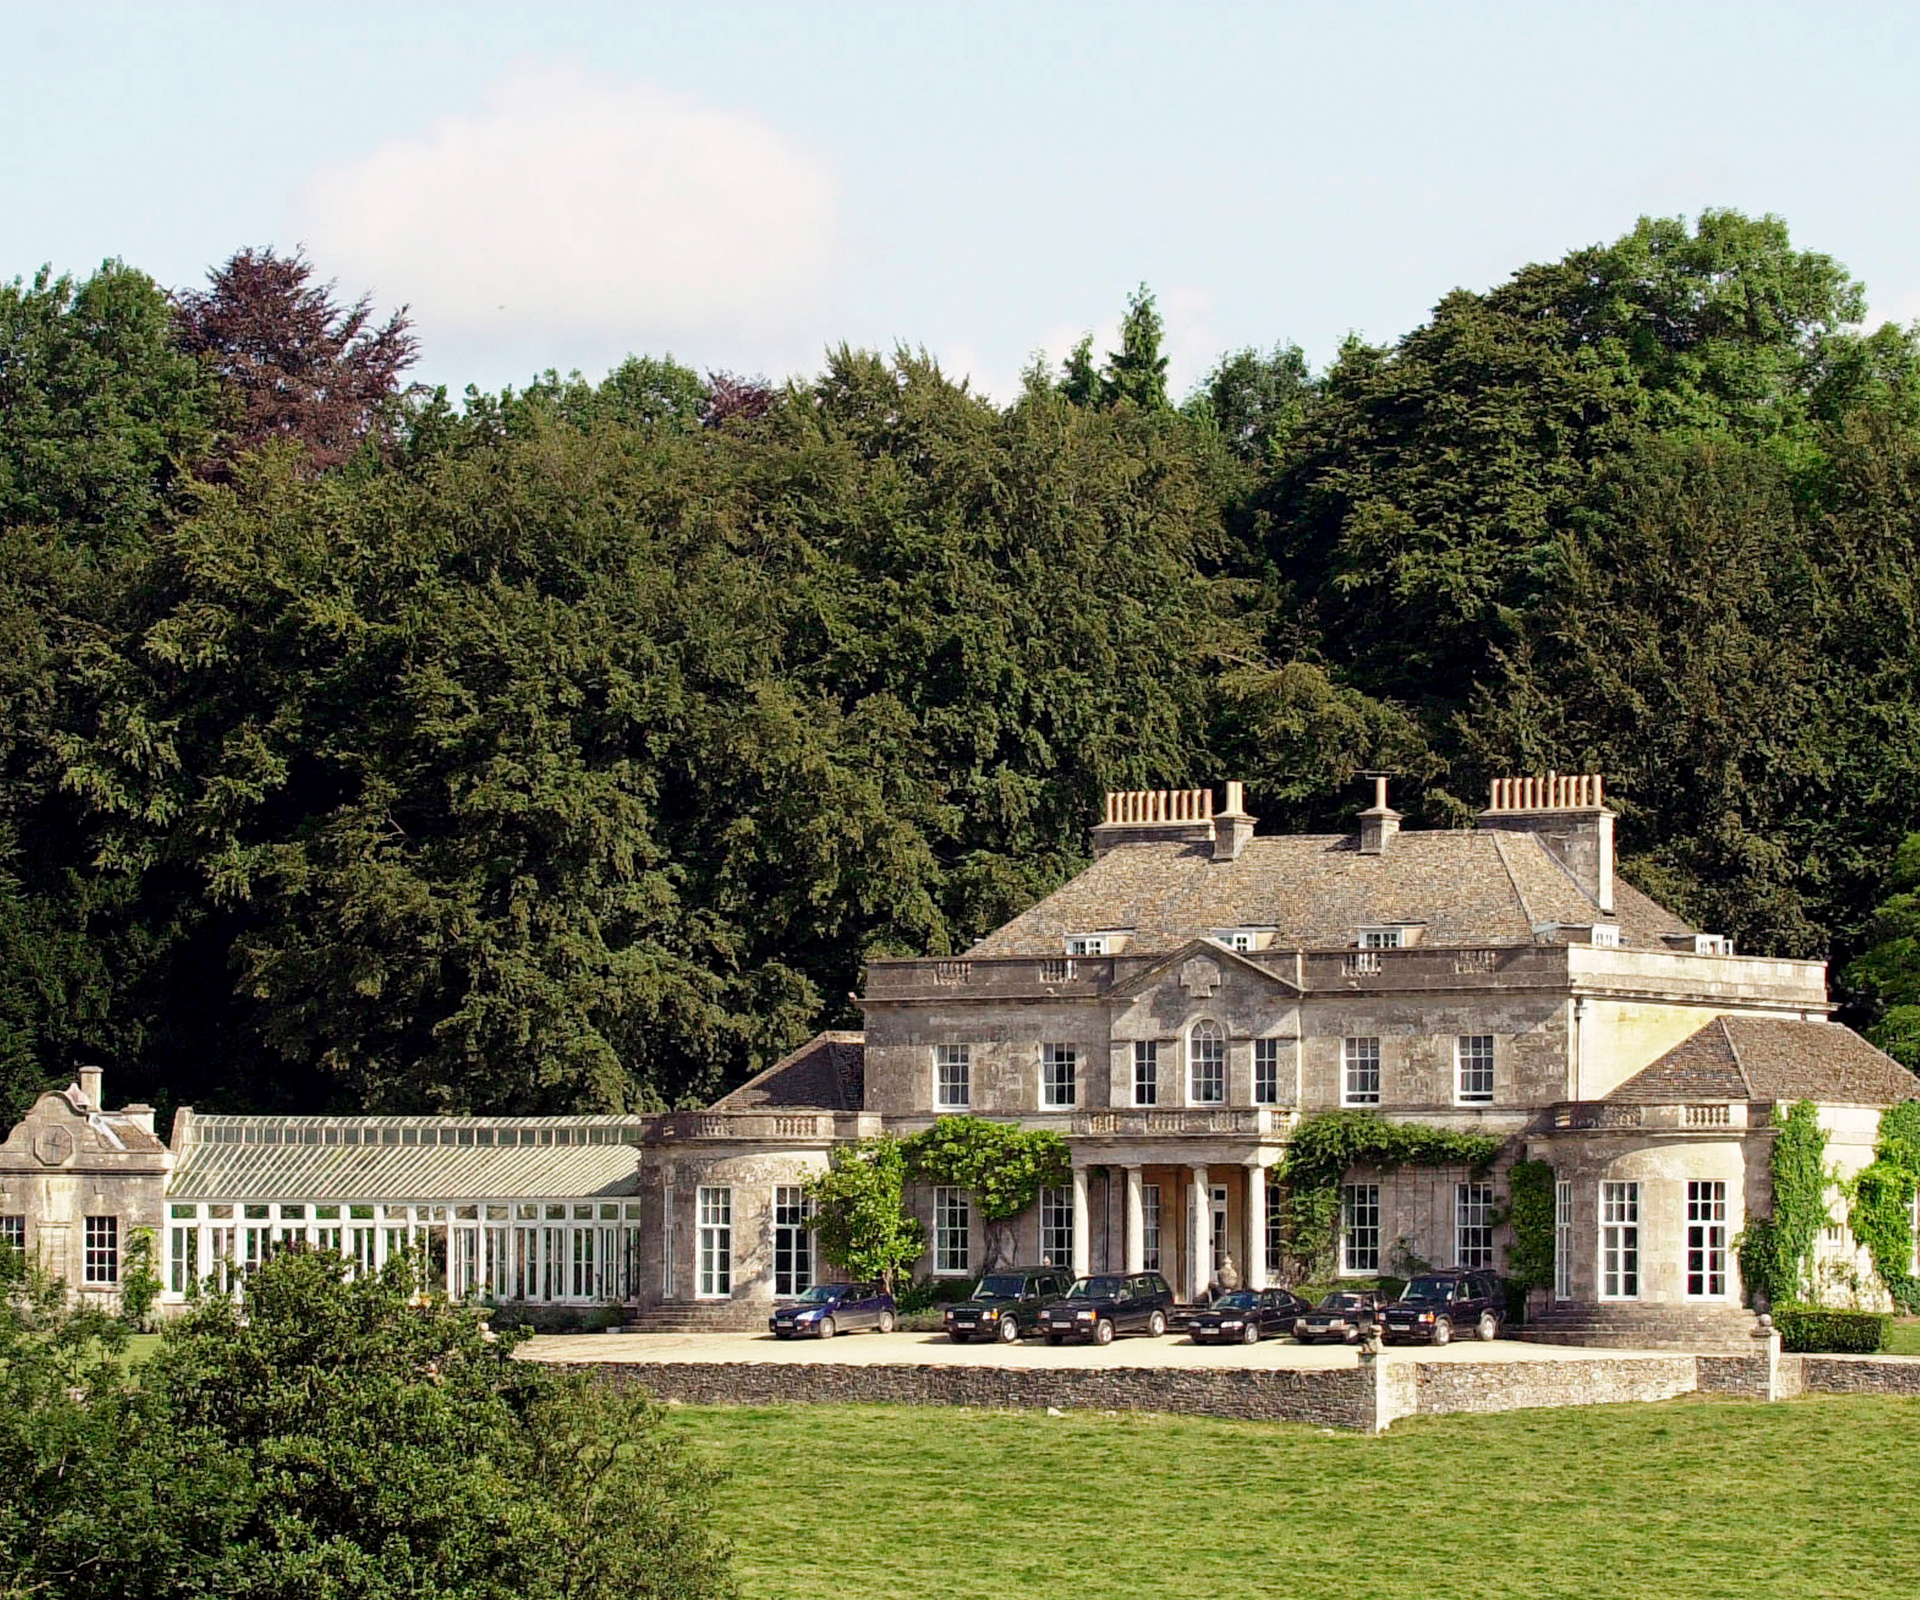 Gatcombe Park, homes owned by the British royal family